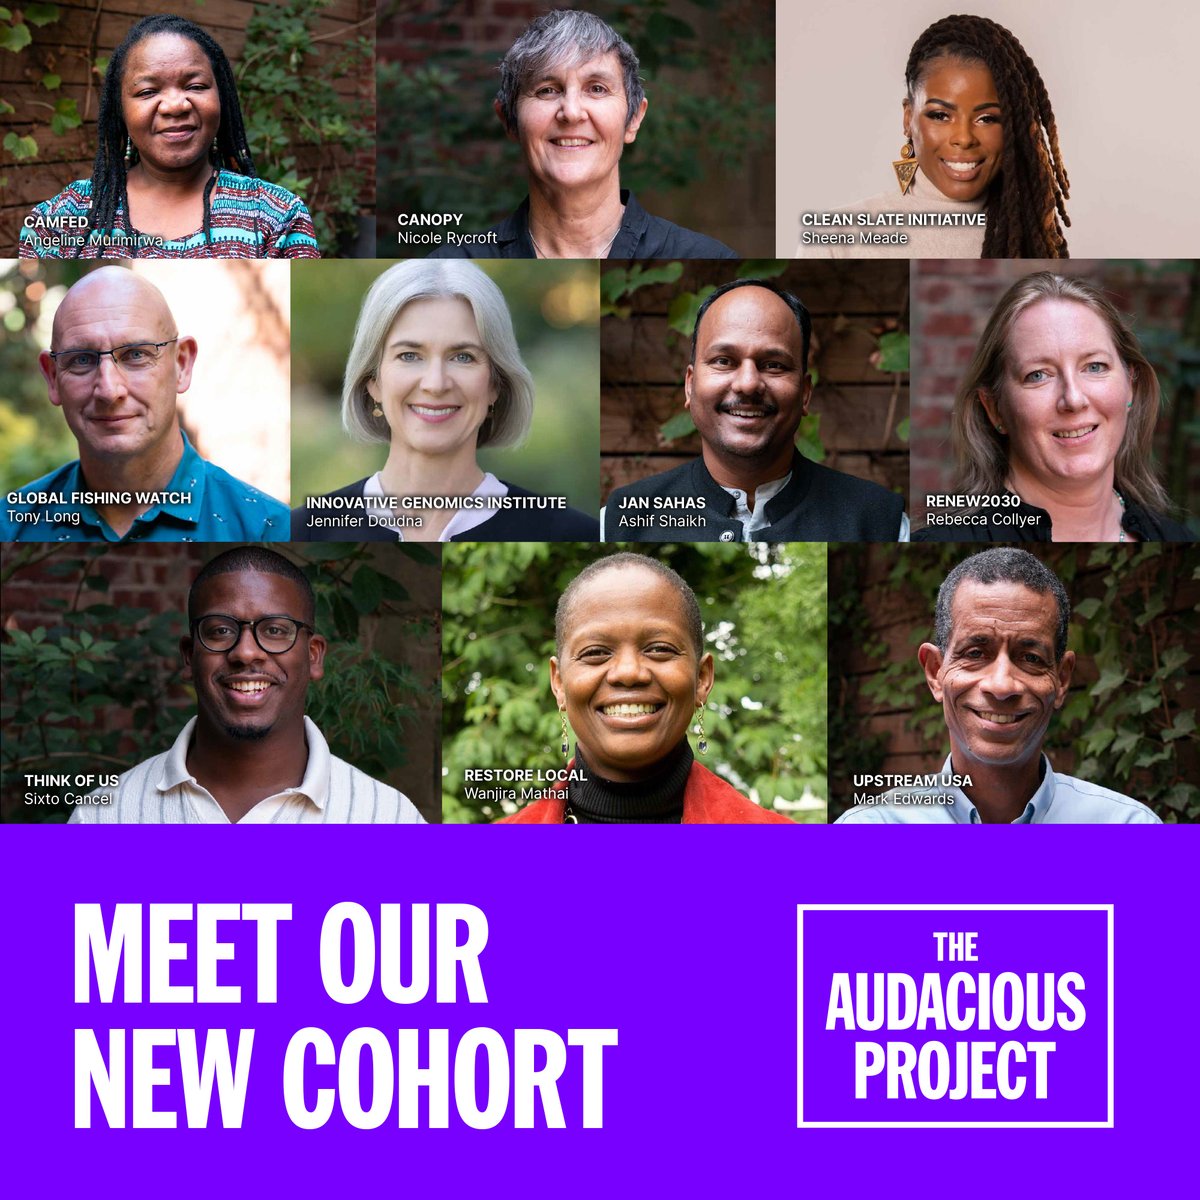 Ten bold ideas with the potential to change the world were announced as this year’s Audacious Project cohort at TED2023. Find out more virg.in/3rmw @TheAudaciousPrj #TED2023 #AudaciousProject